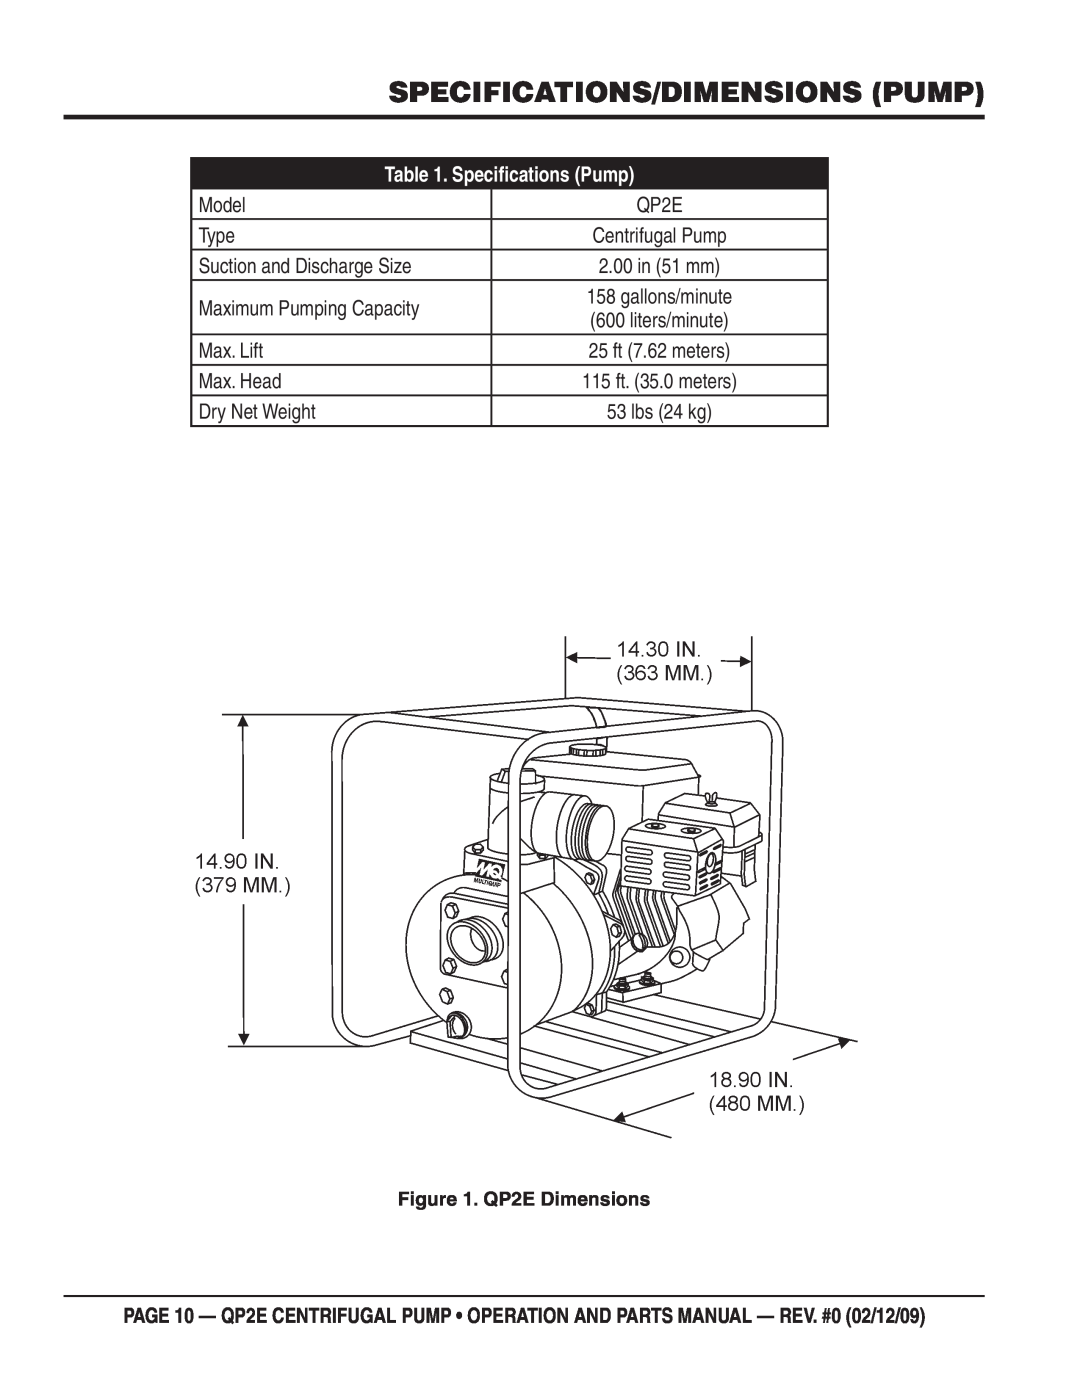 Multiquip manual Specifications/Dimensions Pump, Speciﬁcations Pump, QP2E Dimensions 